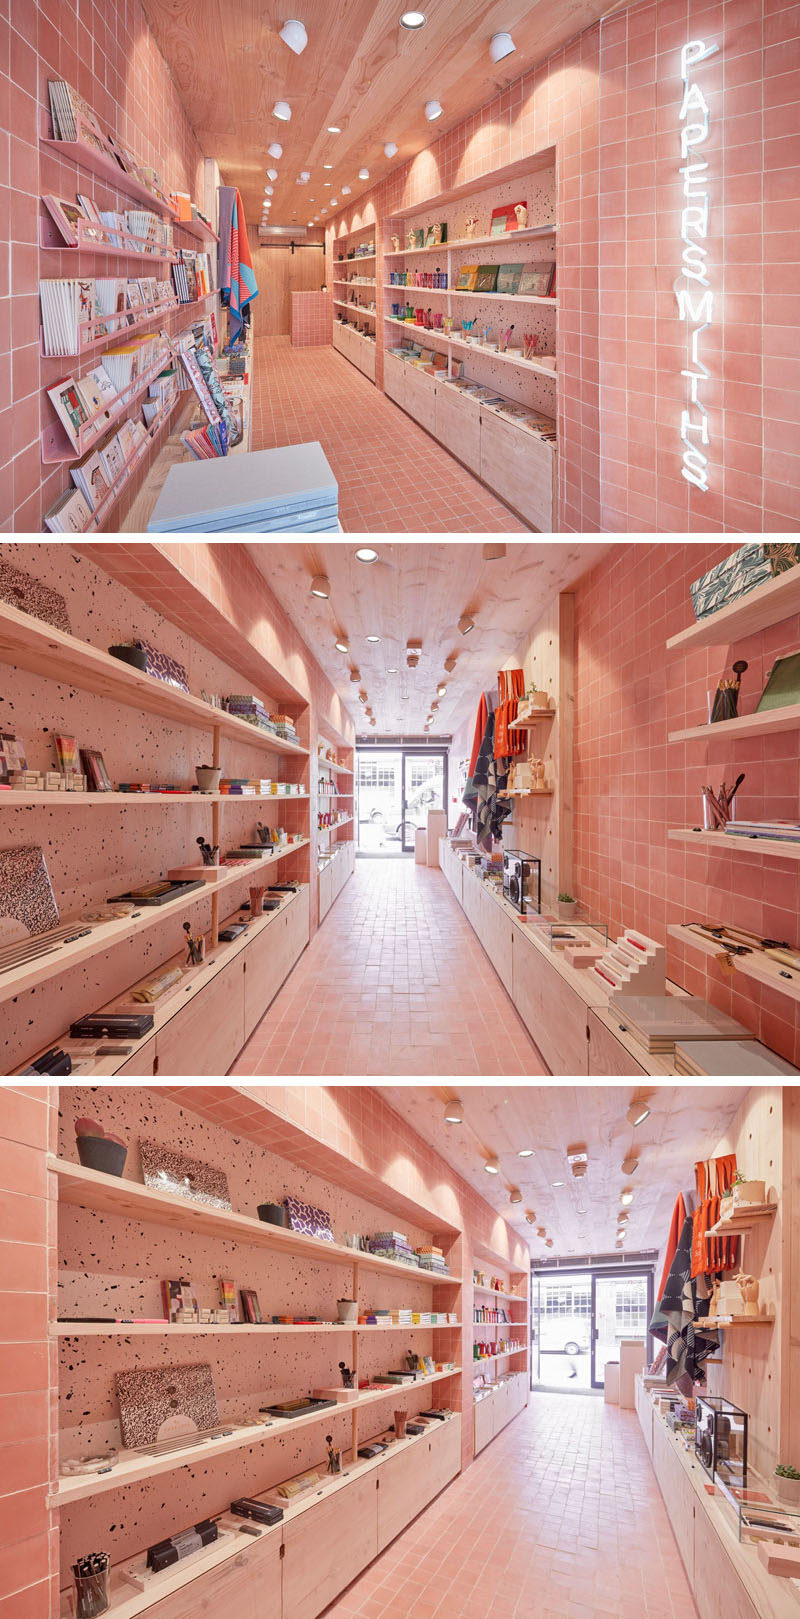 Along a row of similar sized stores, this new retail stationery shop stands out as they created a colorful interior that features European solid Douglas timber, speckled jesmonite and dusky pink encaustic tiles.